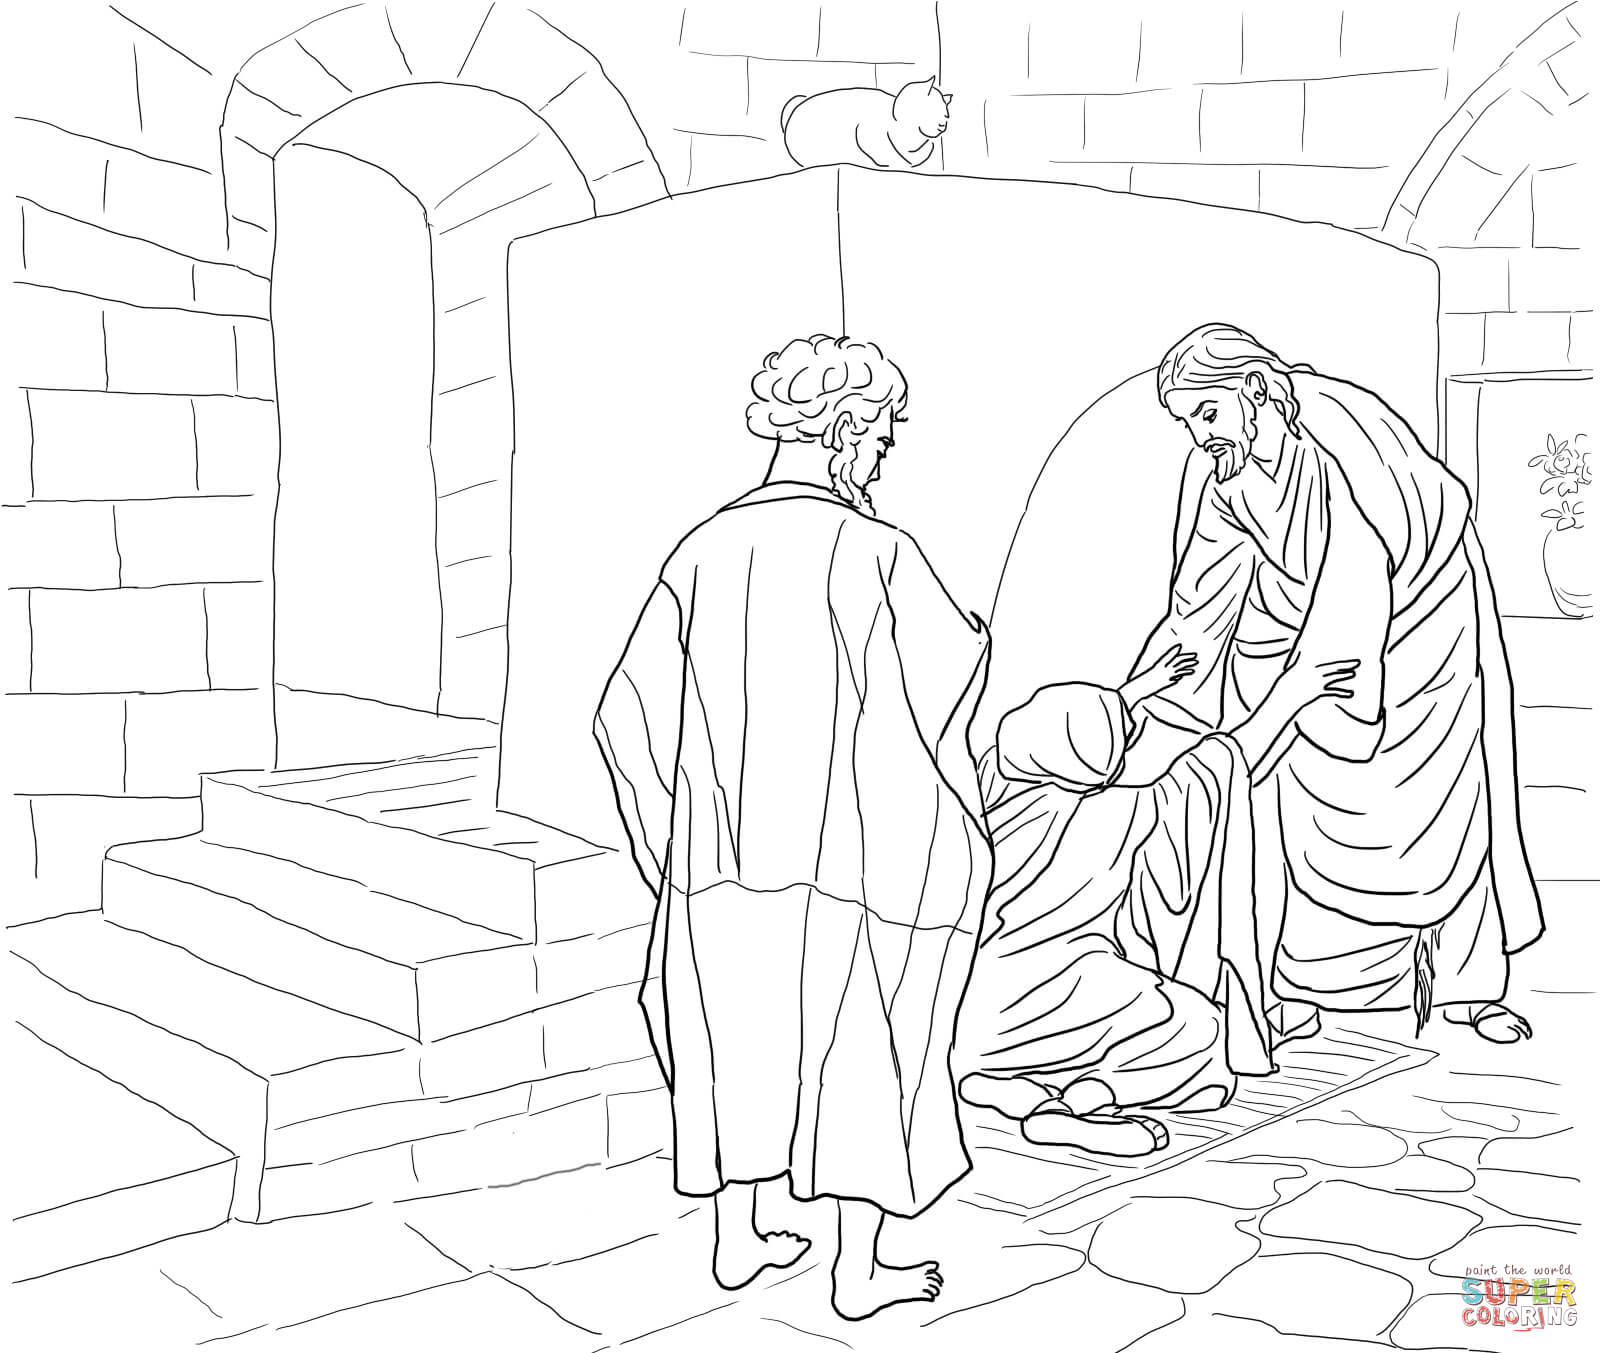 Peter in Prison coloring page | Free Printable Coloring Pages